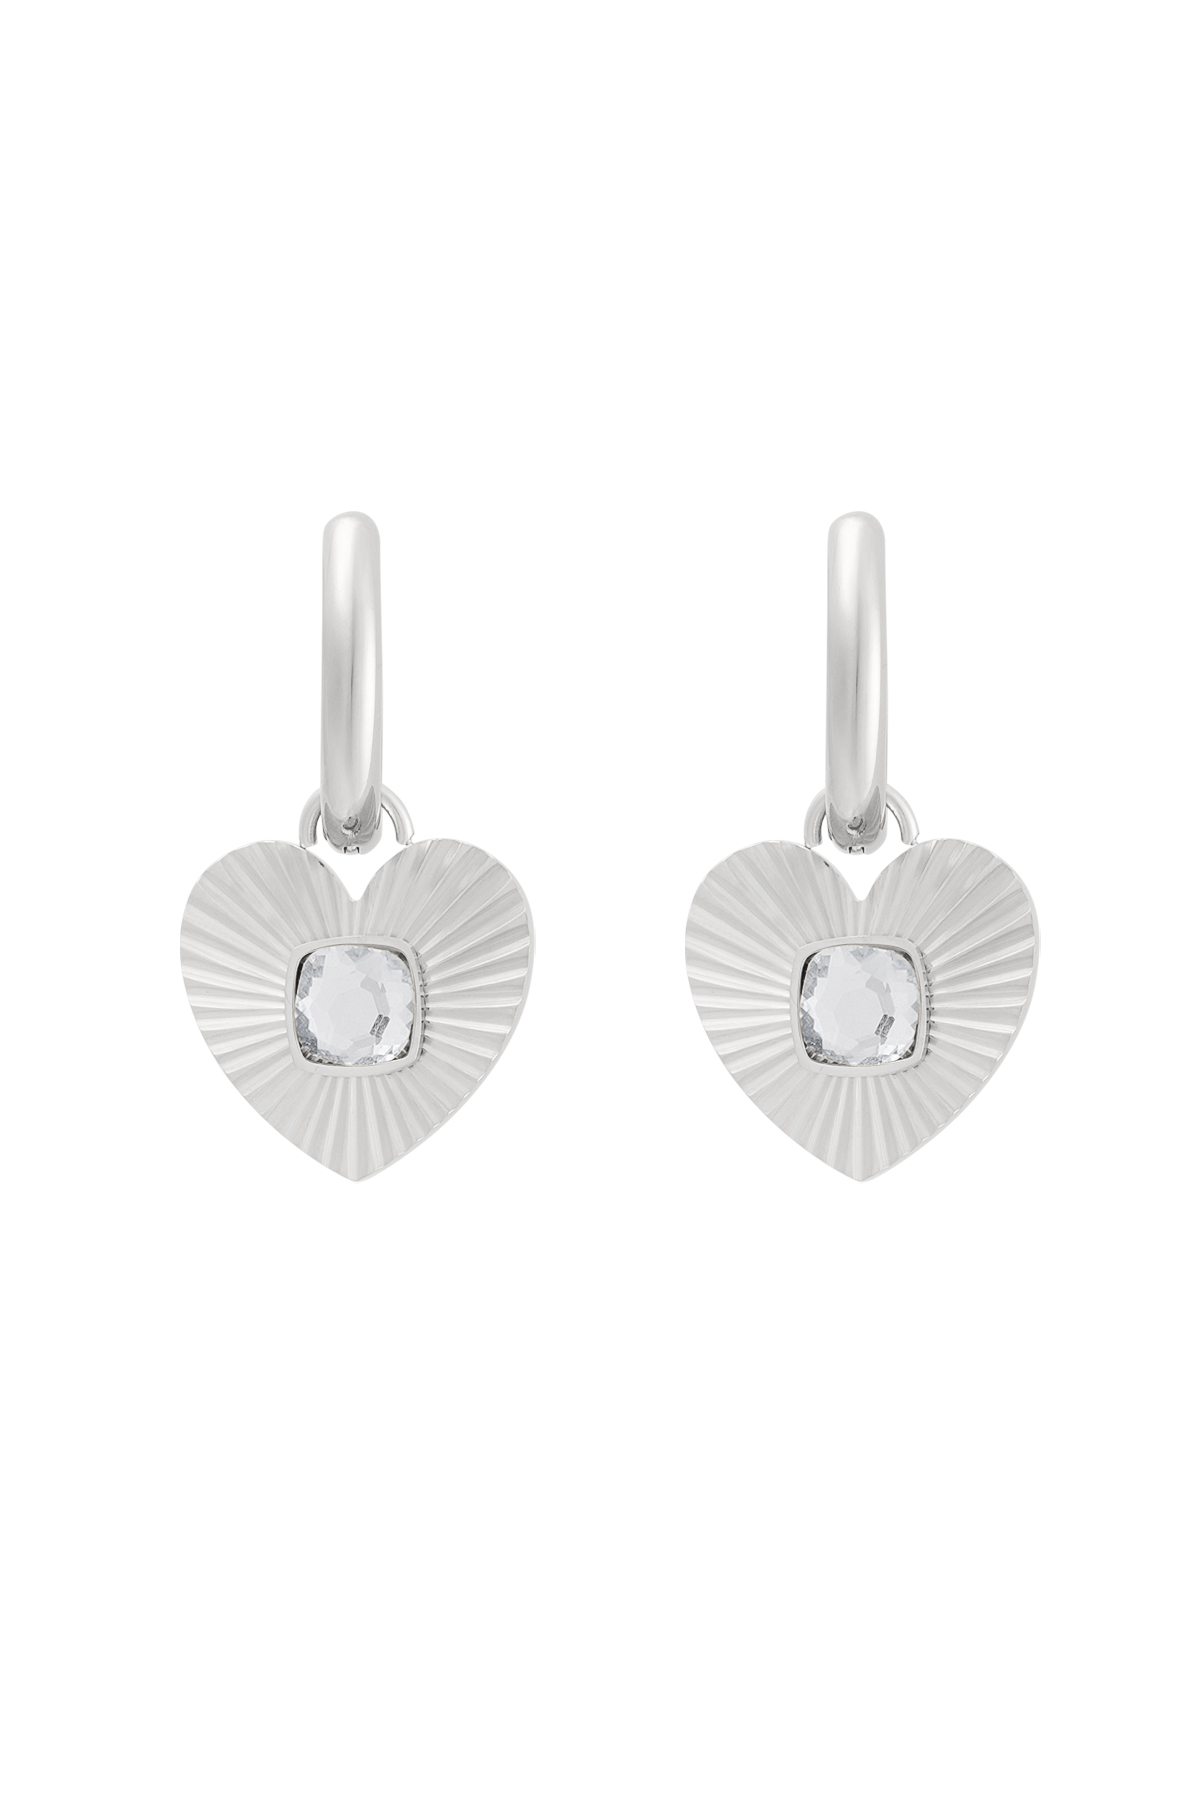 Earrings heart with stone - silver/white 